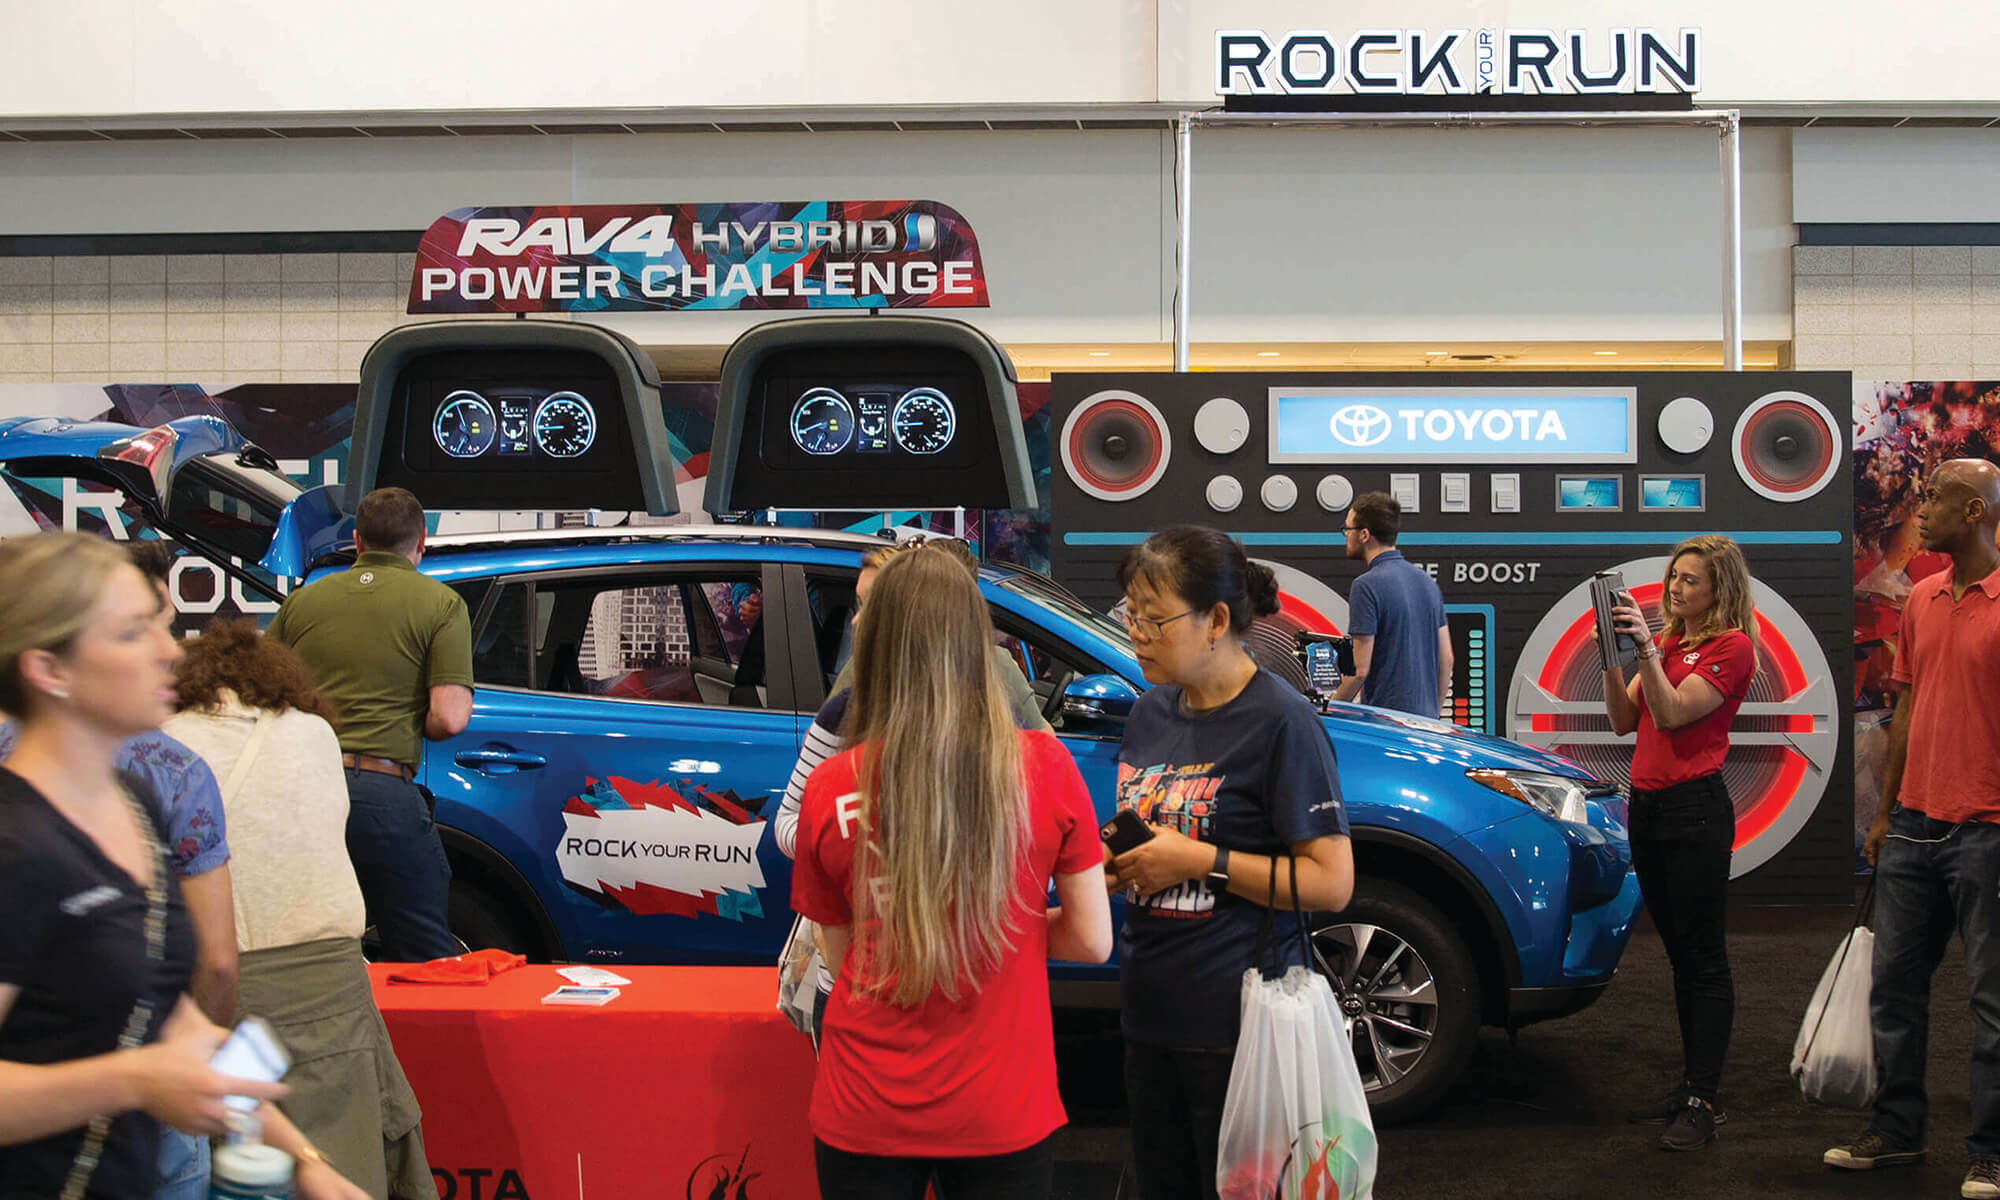 Toyota Rock Your Run event and tradeshow signage including oversized boom box background